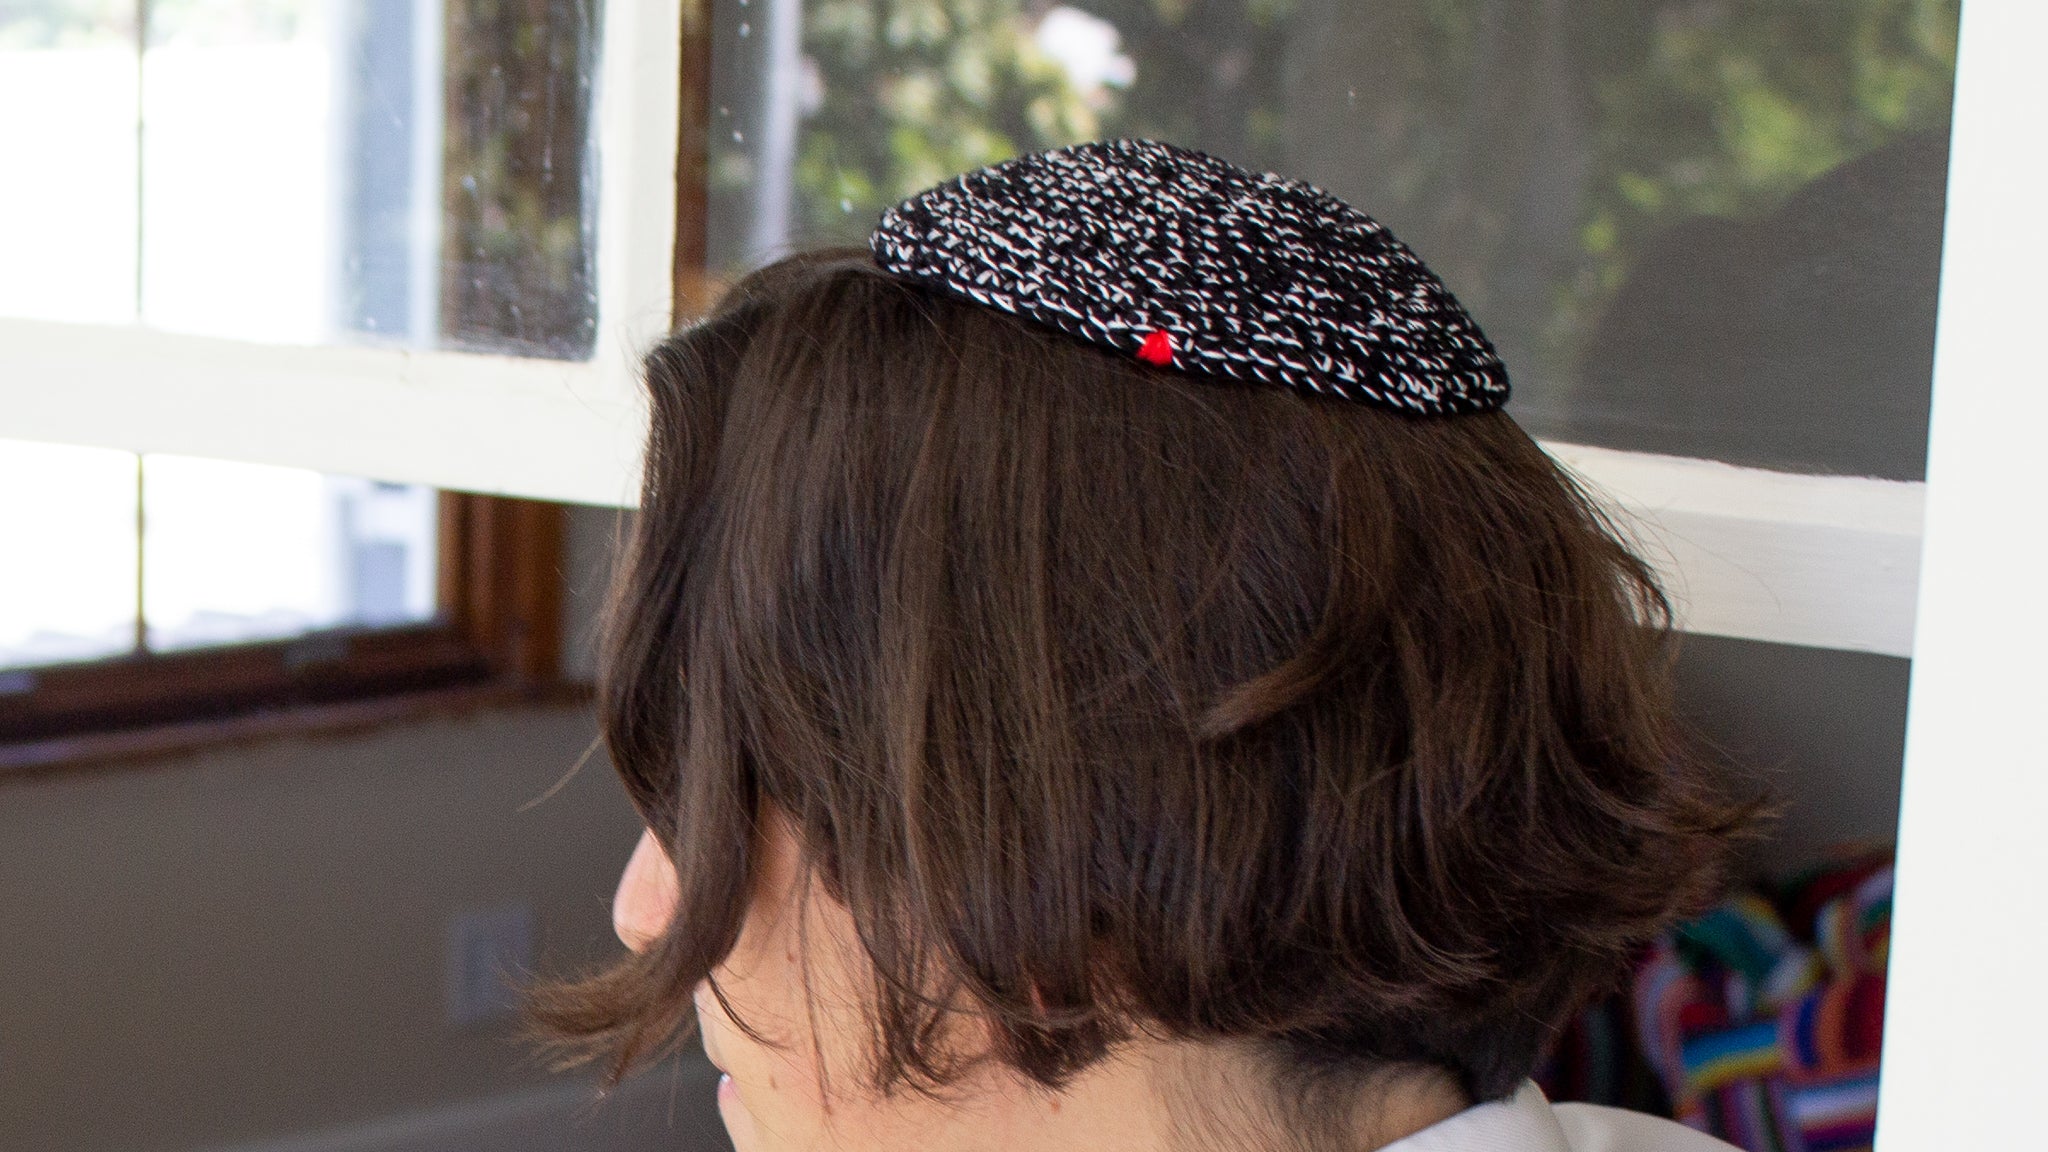 Male sitting outside, in-front of a window with his Penelope D Judaica, black and white, Melange Kippah on his head.